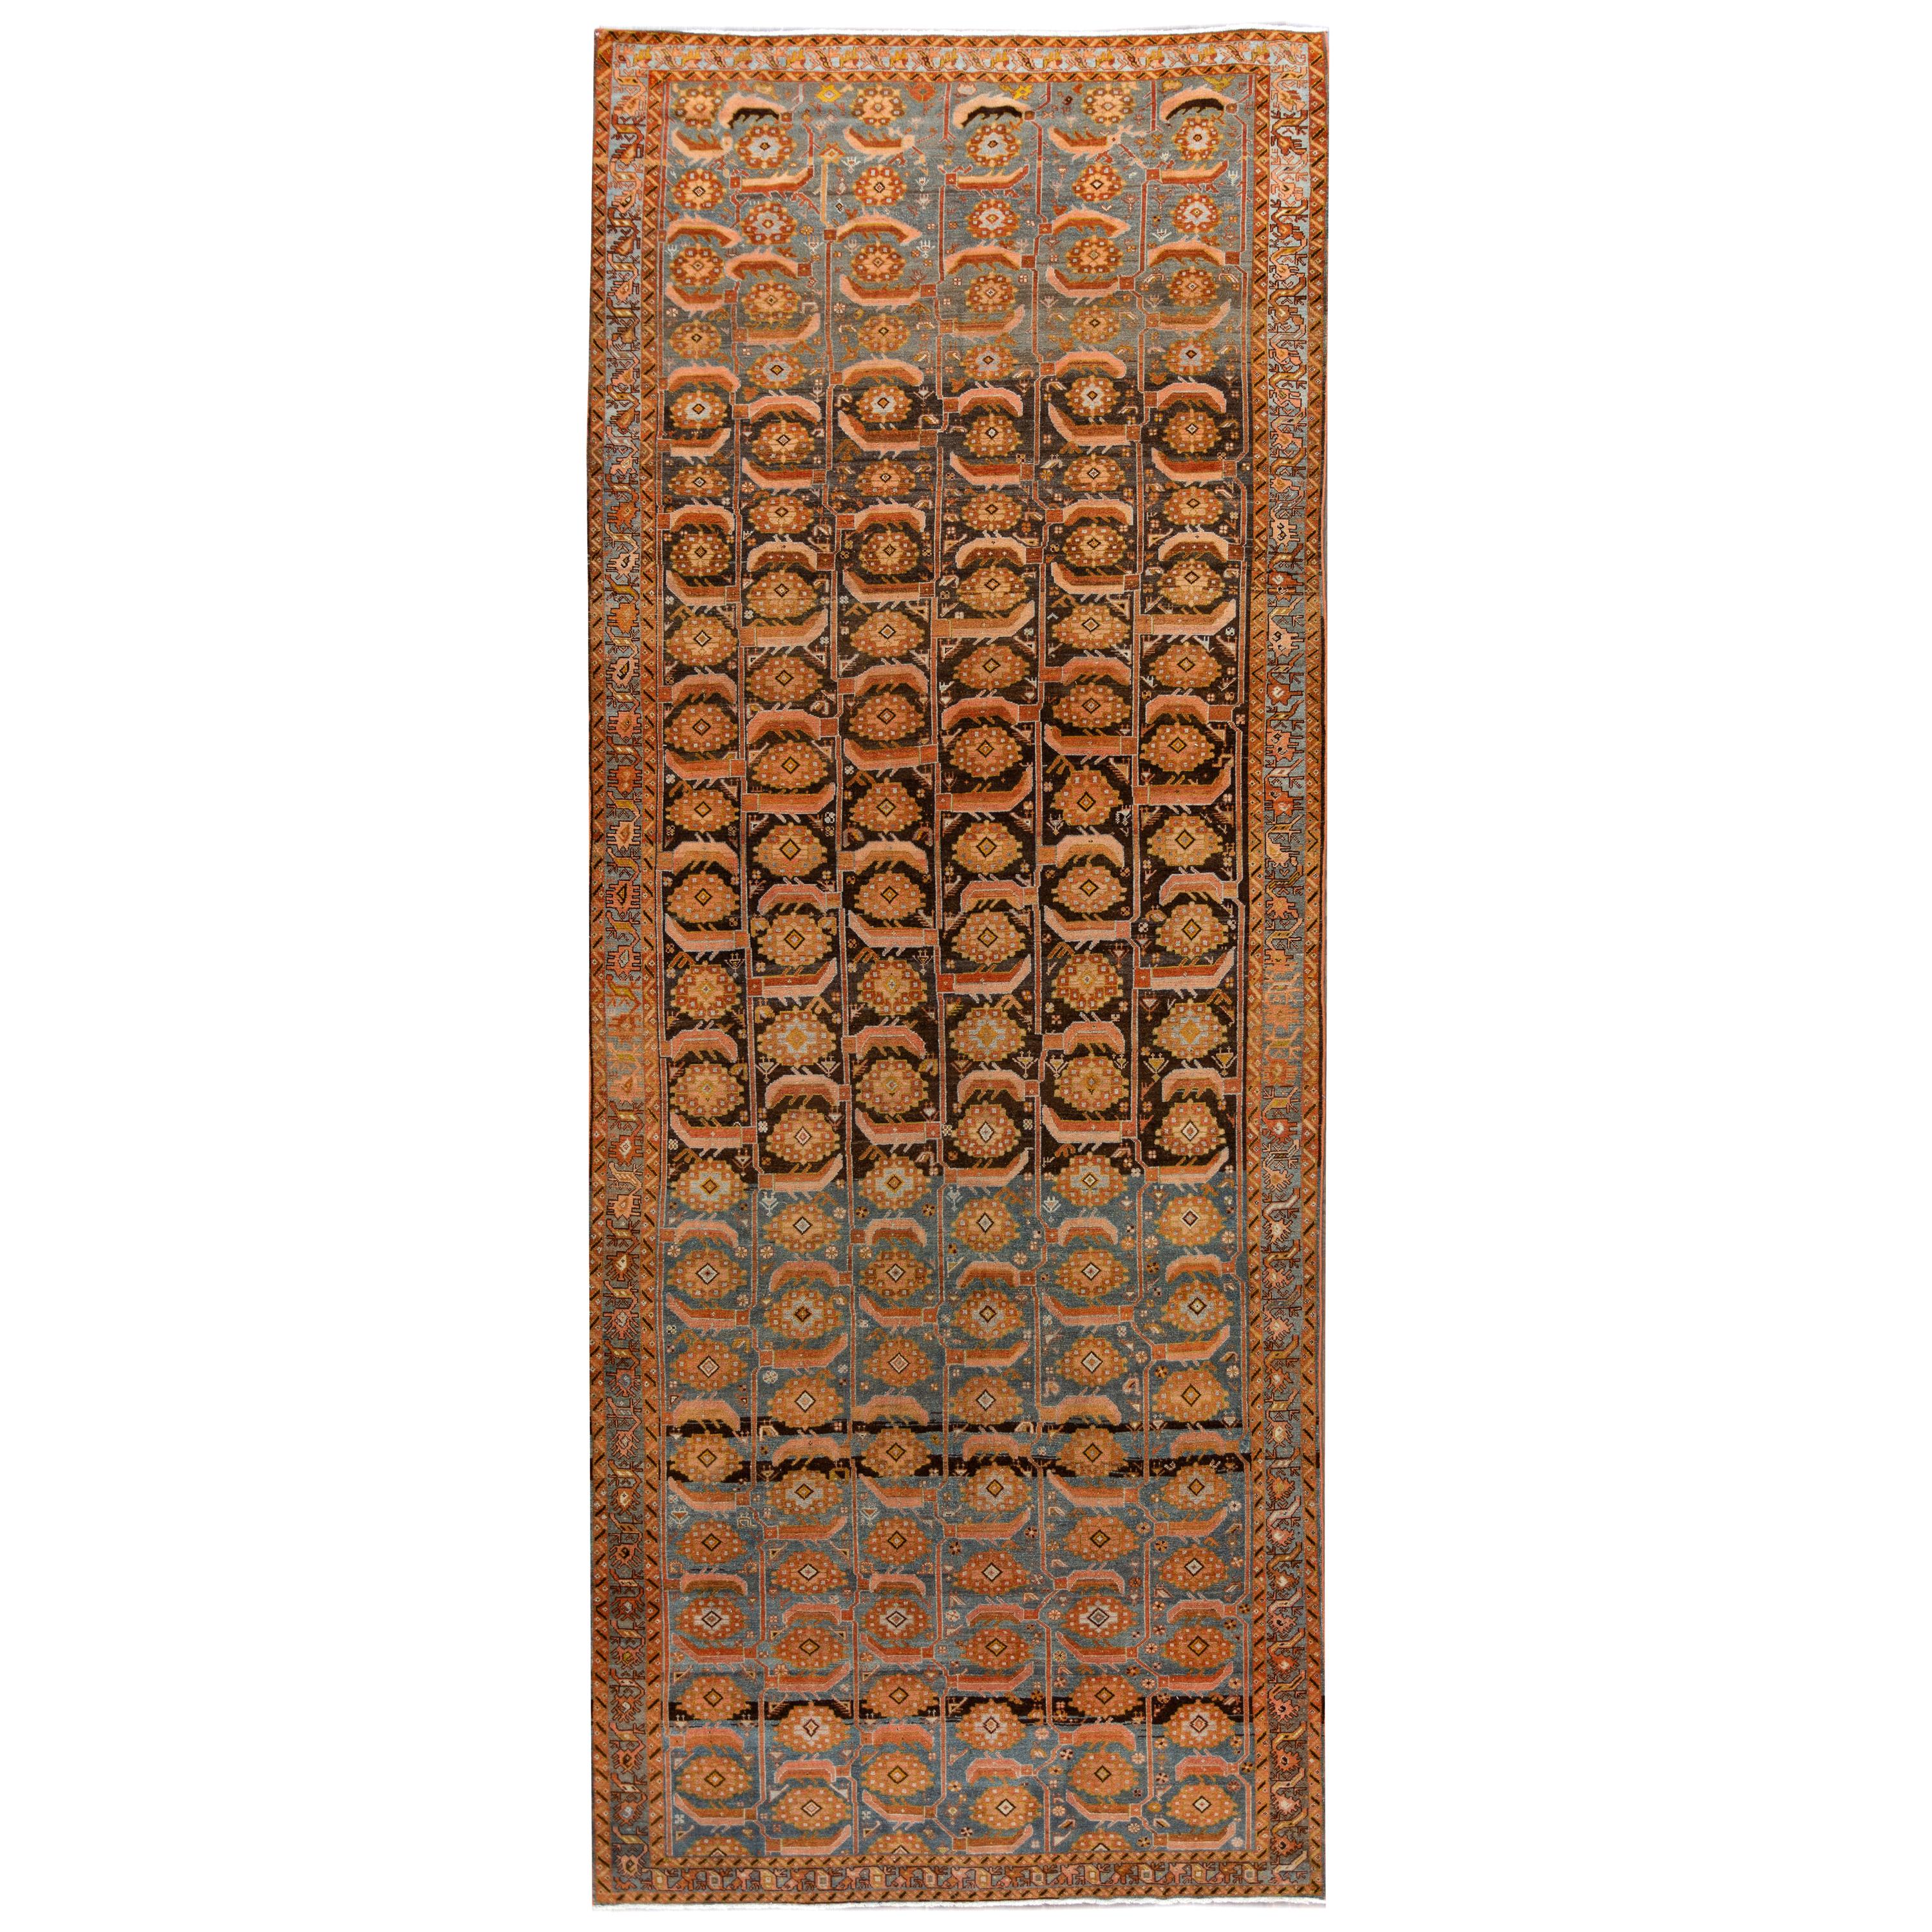 Antique Malayer Runner Rug, Hand Knotted Wool